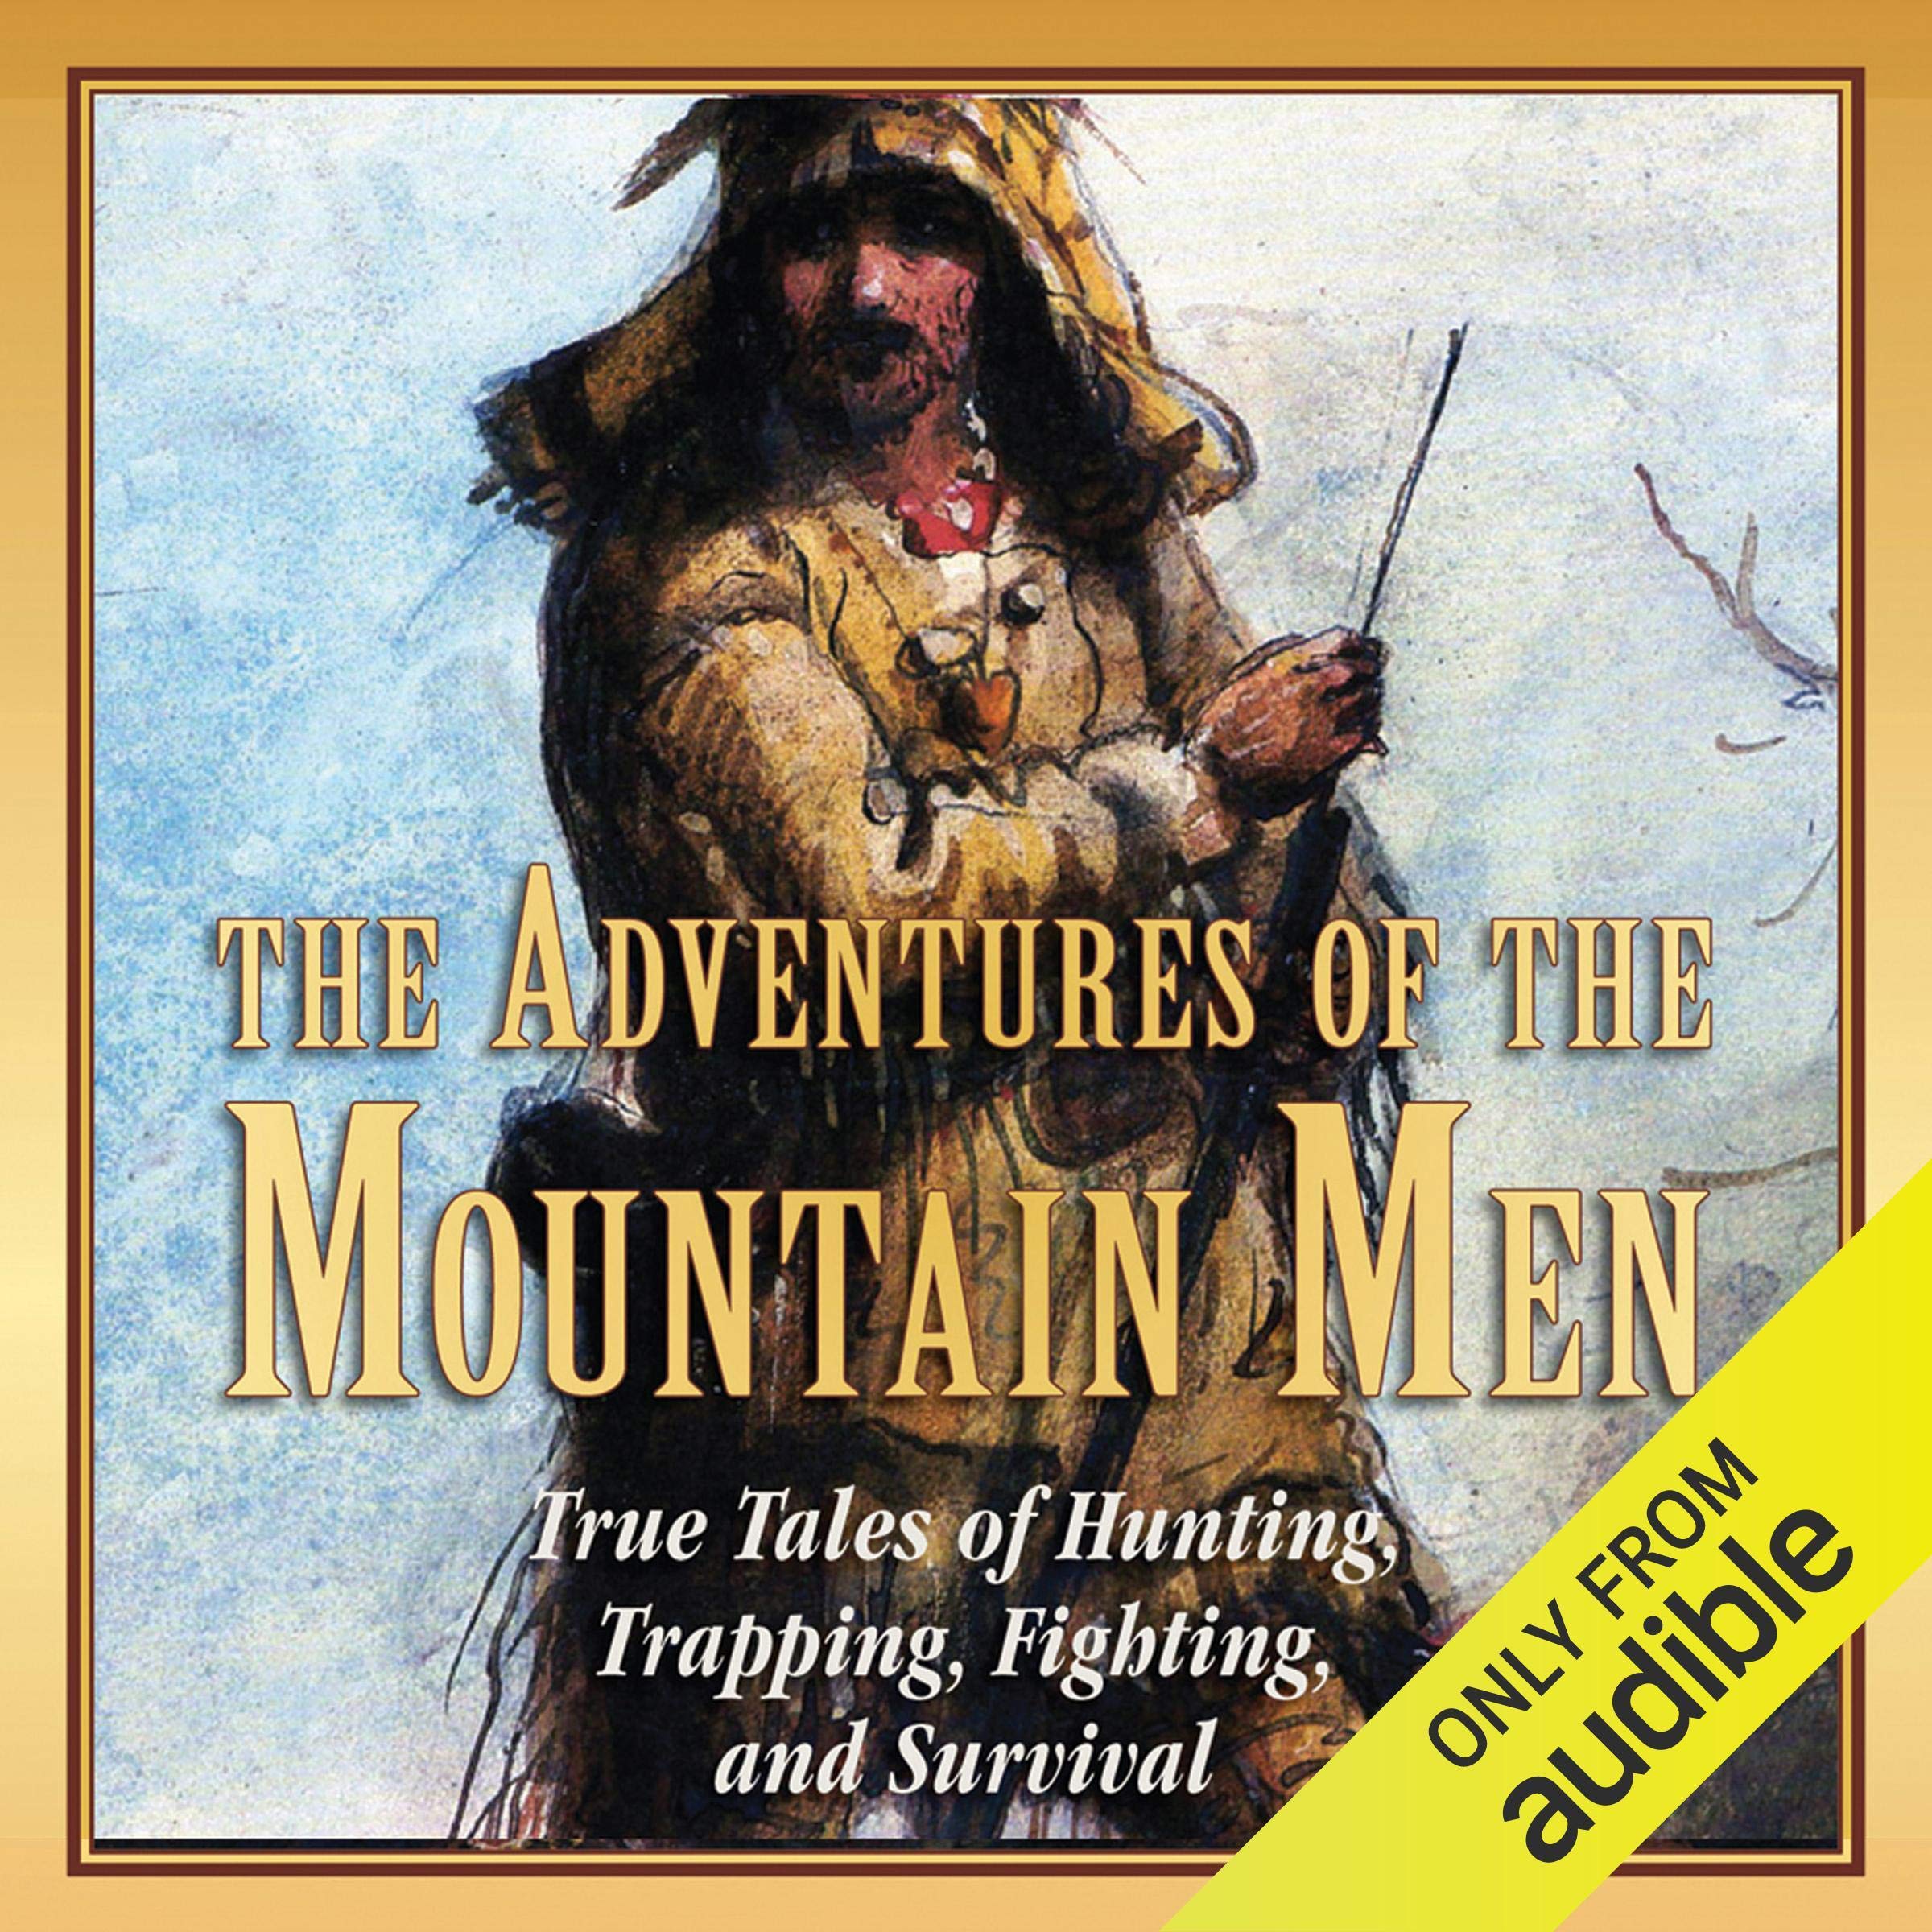 The Adventures of the Mountain Men: True Tales of Hunting, Trapping, Fighting, and Survival